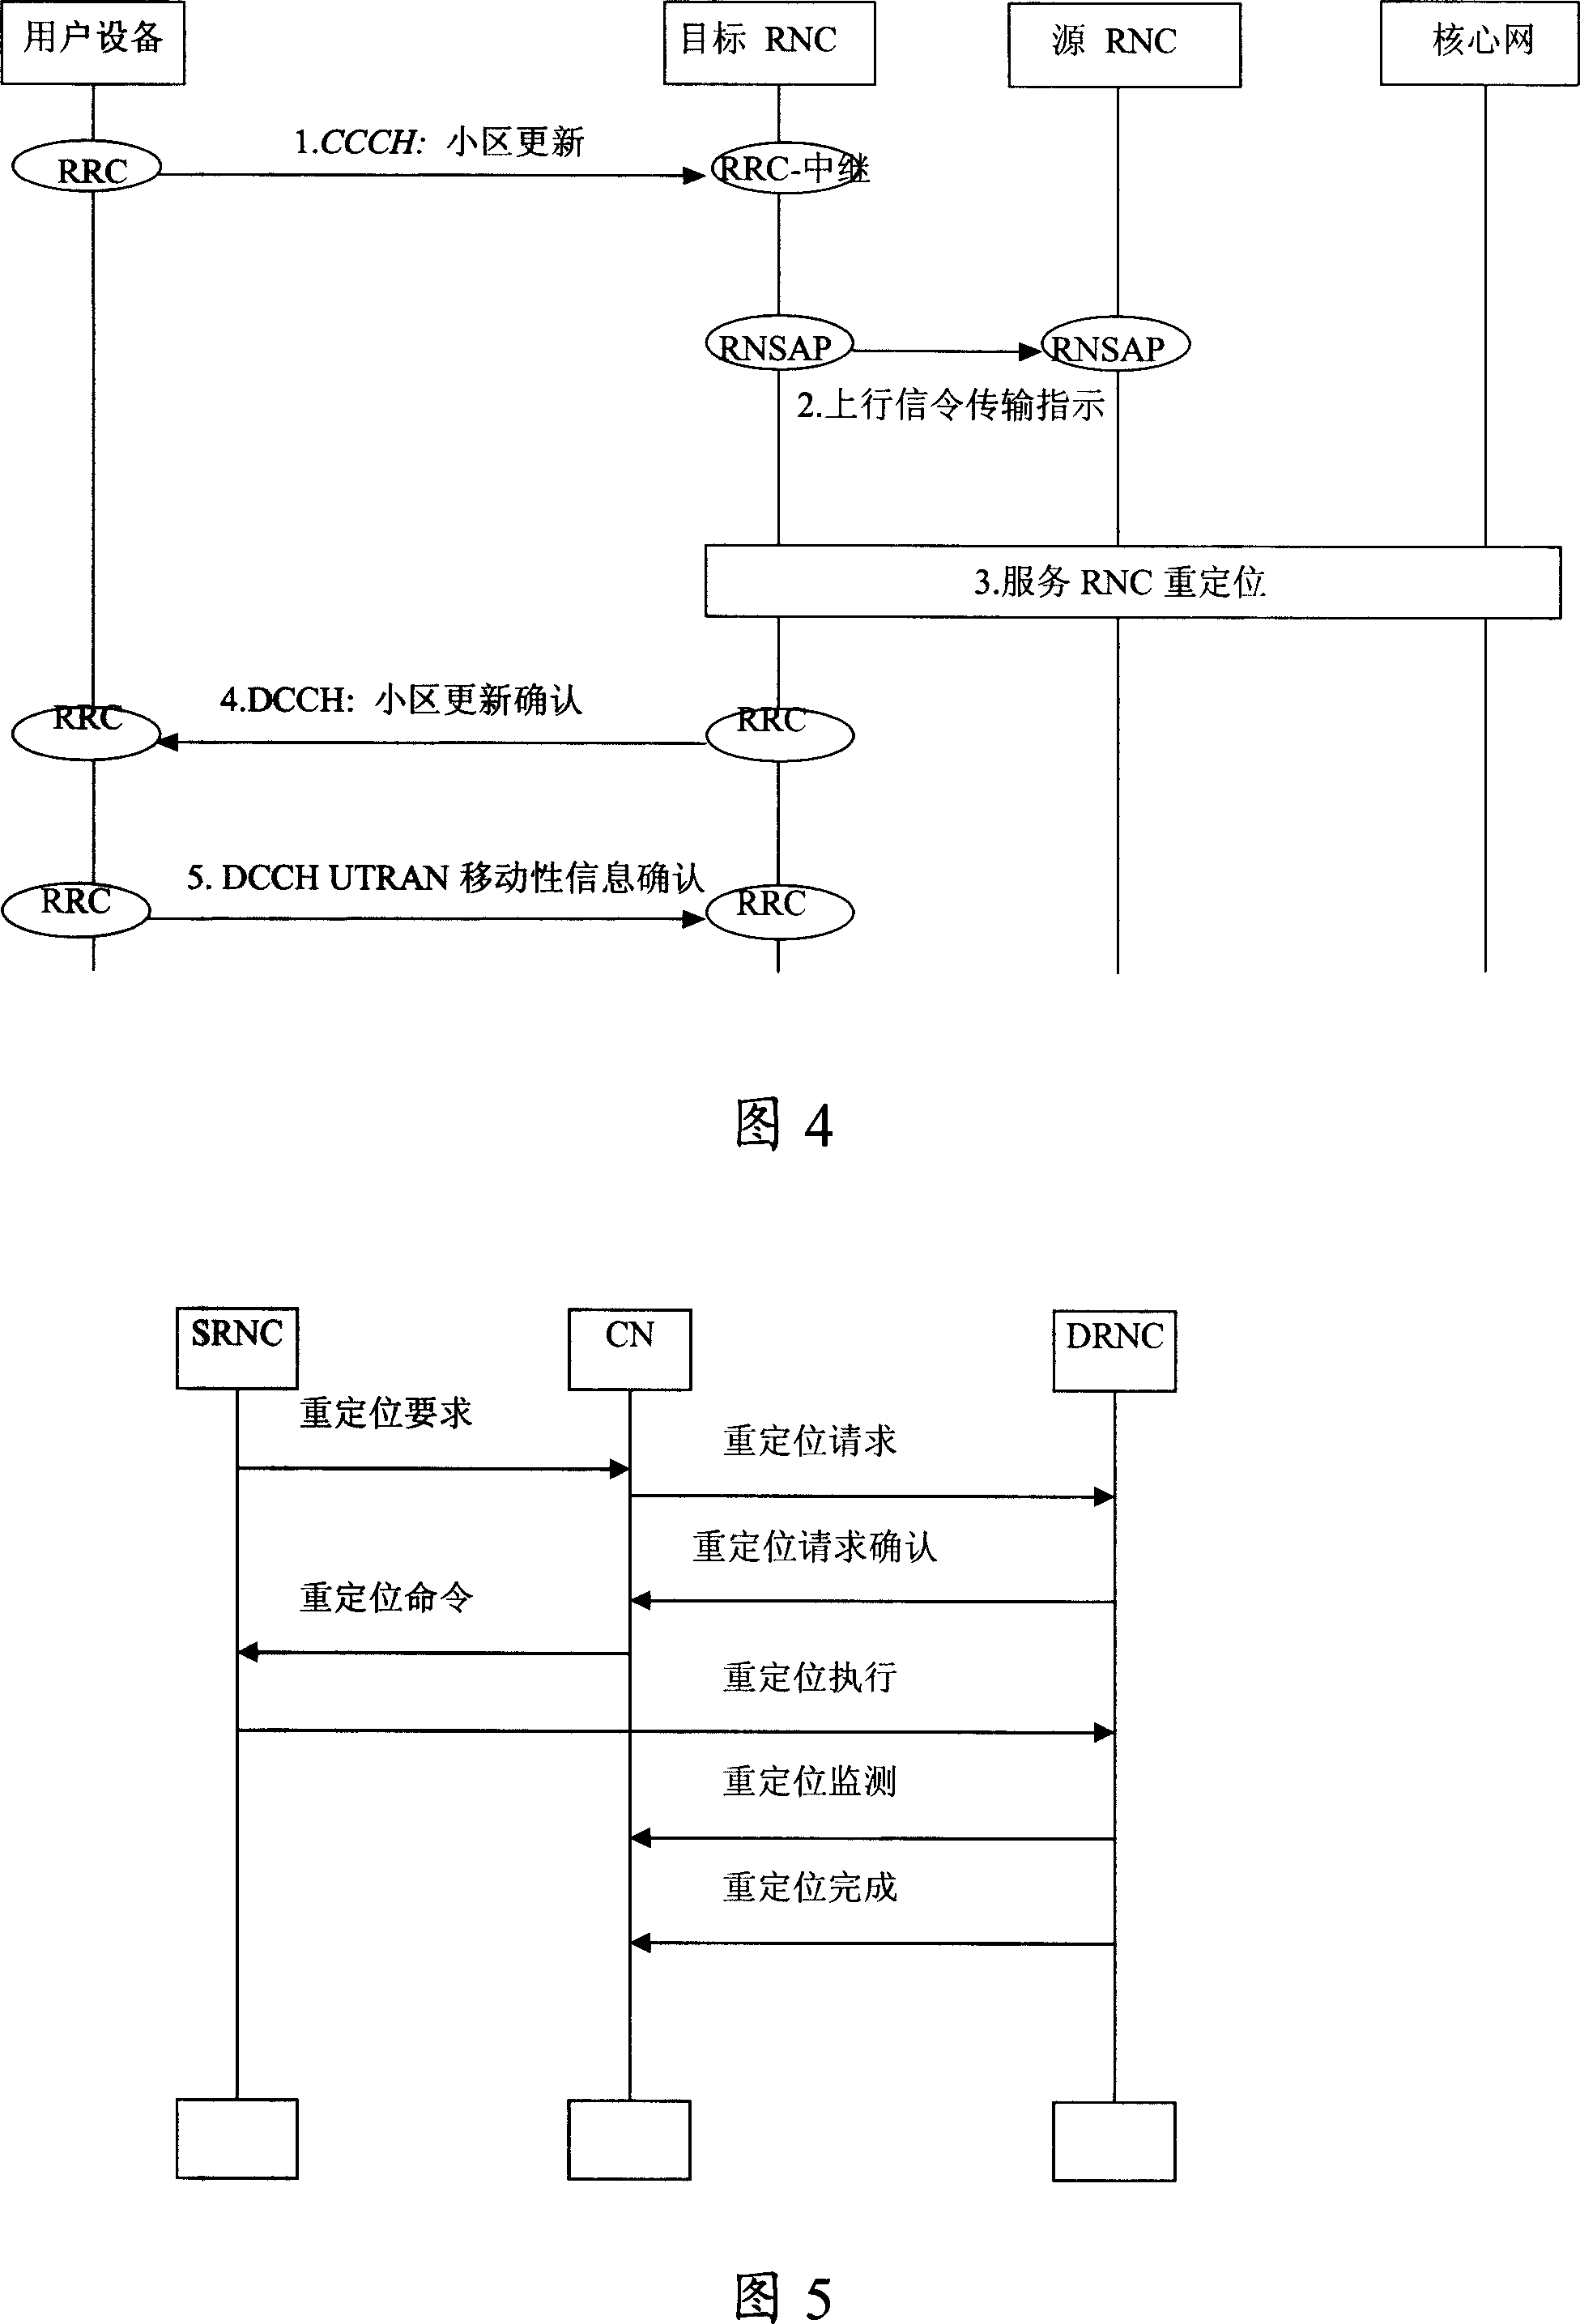 A holding method for cross-Iur interface connection of the multicast service and DRNC